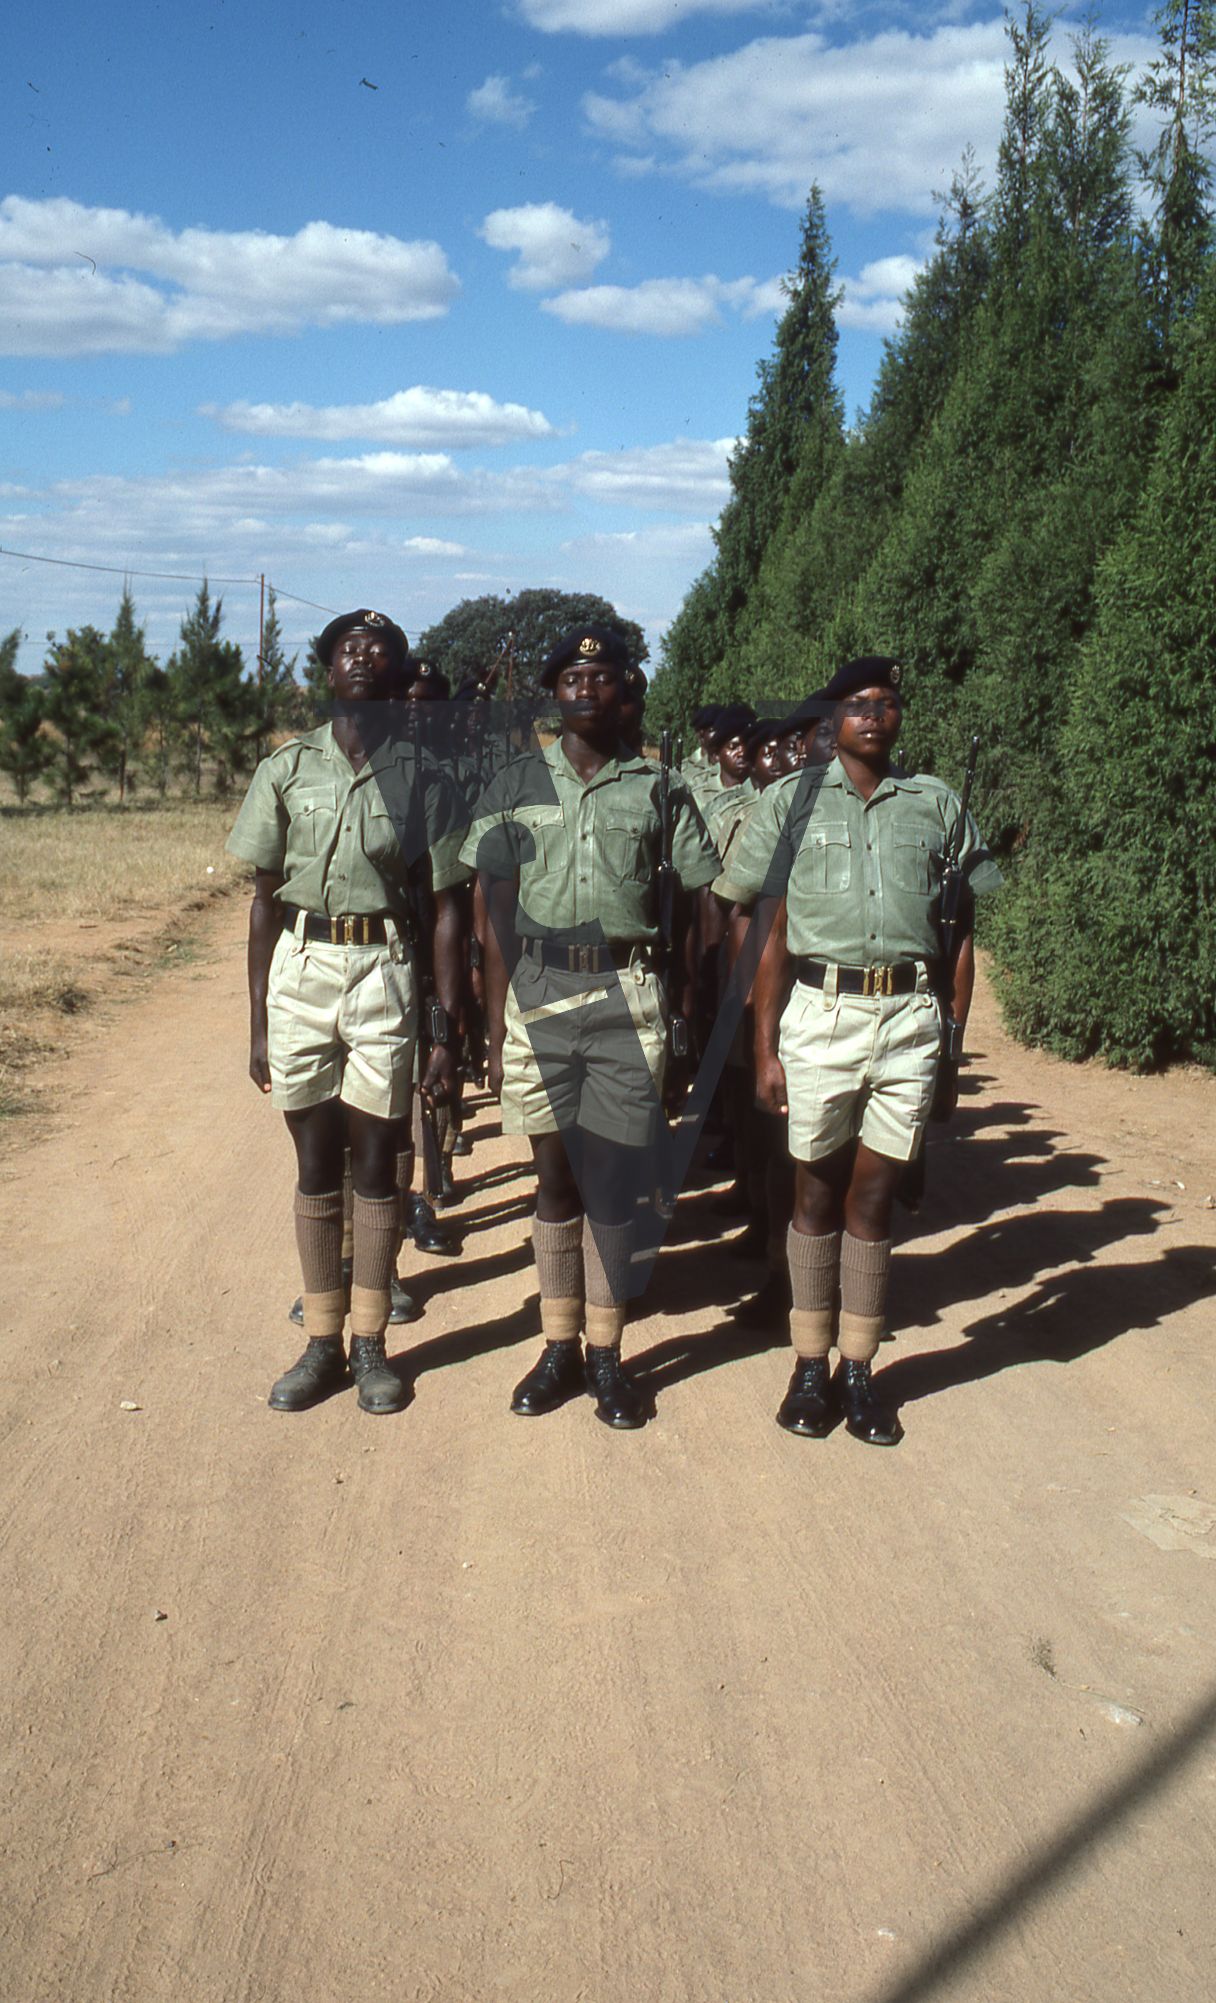 Rhodesia, Rhodesian Light Infantry, soldiers standing at attention, military training area, full shot.